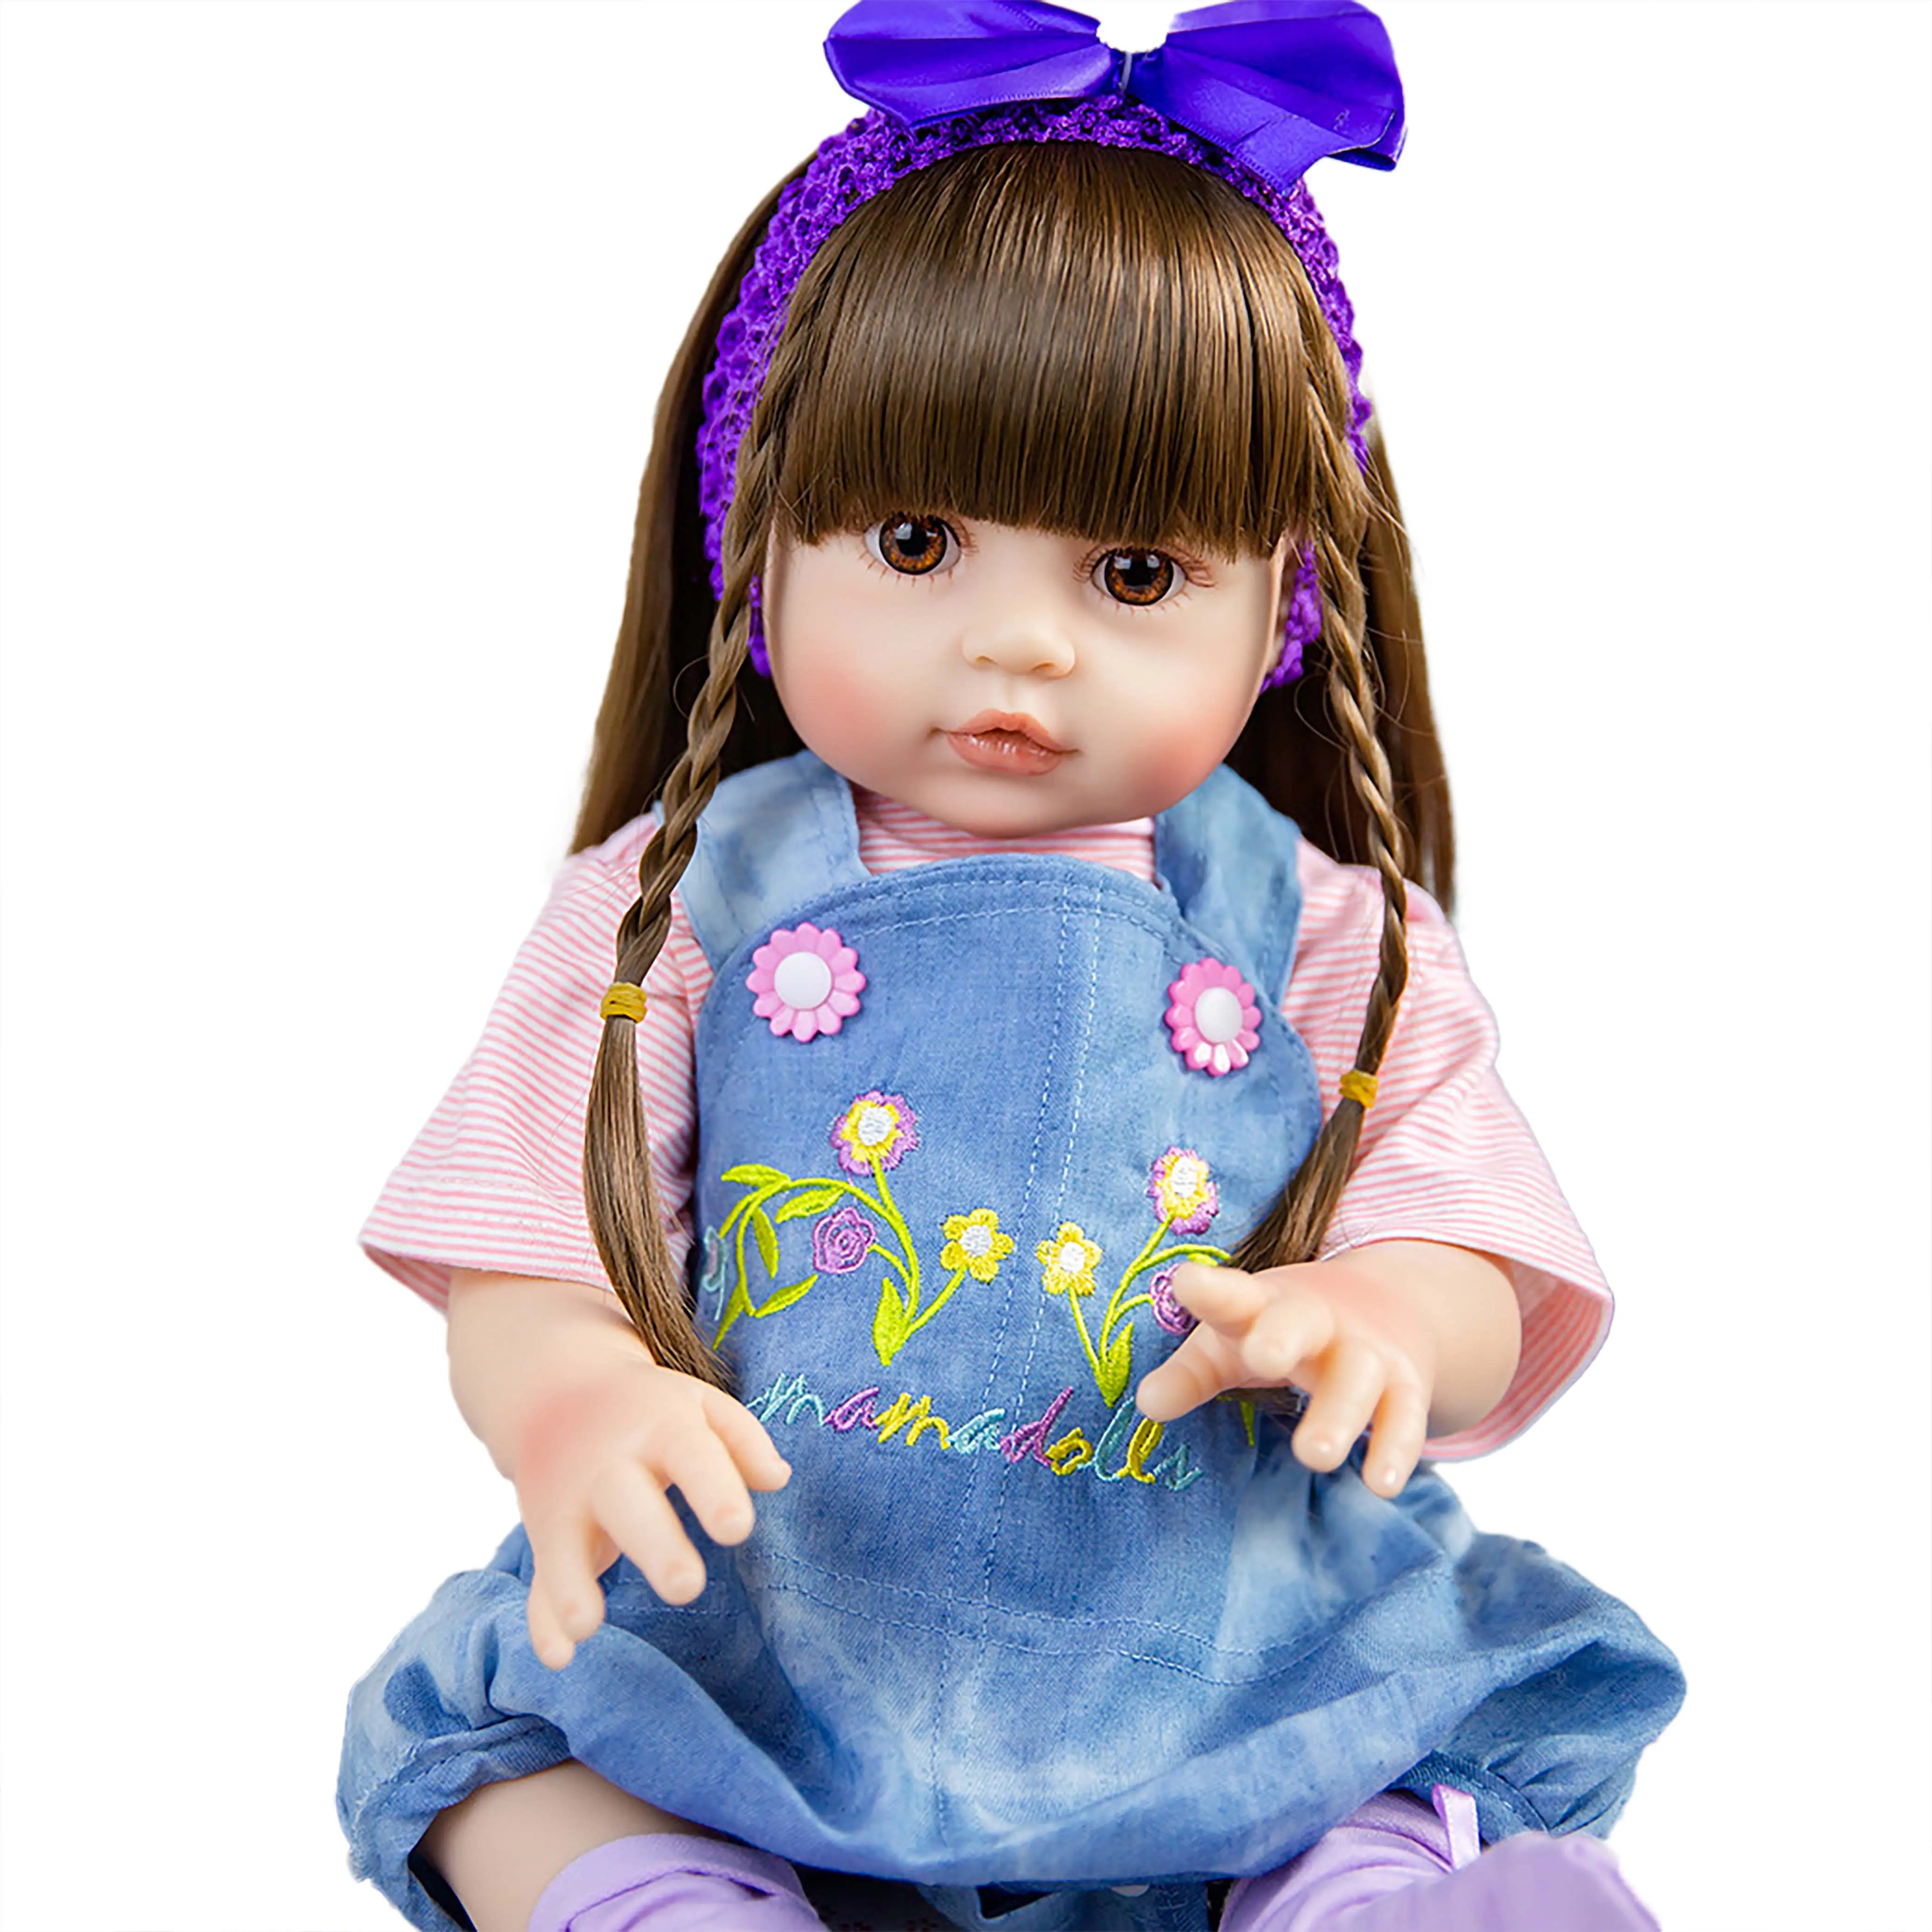 Silicone Vinyl Angelo reborn Toddler Doll Girl Princess Baby Toy Cloth Body Like Real Looking Baby Dolls